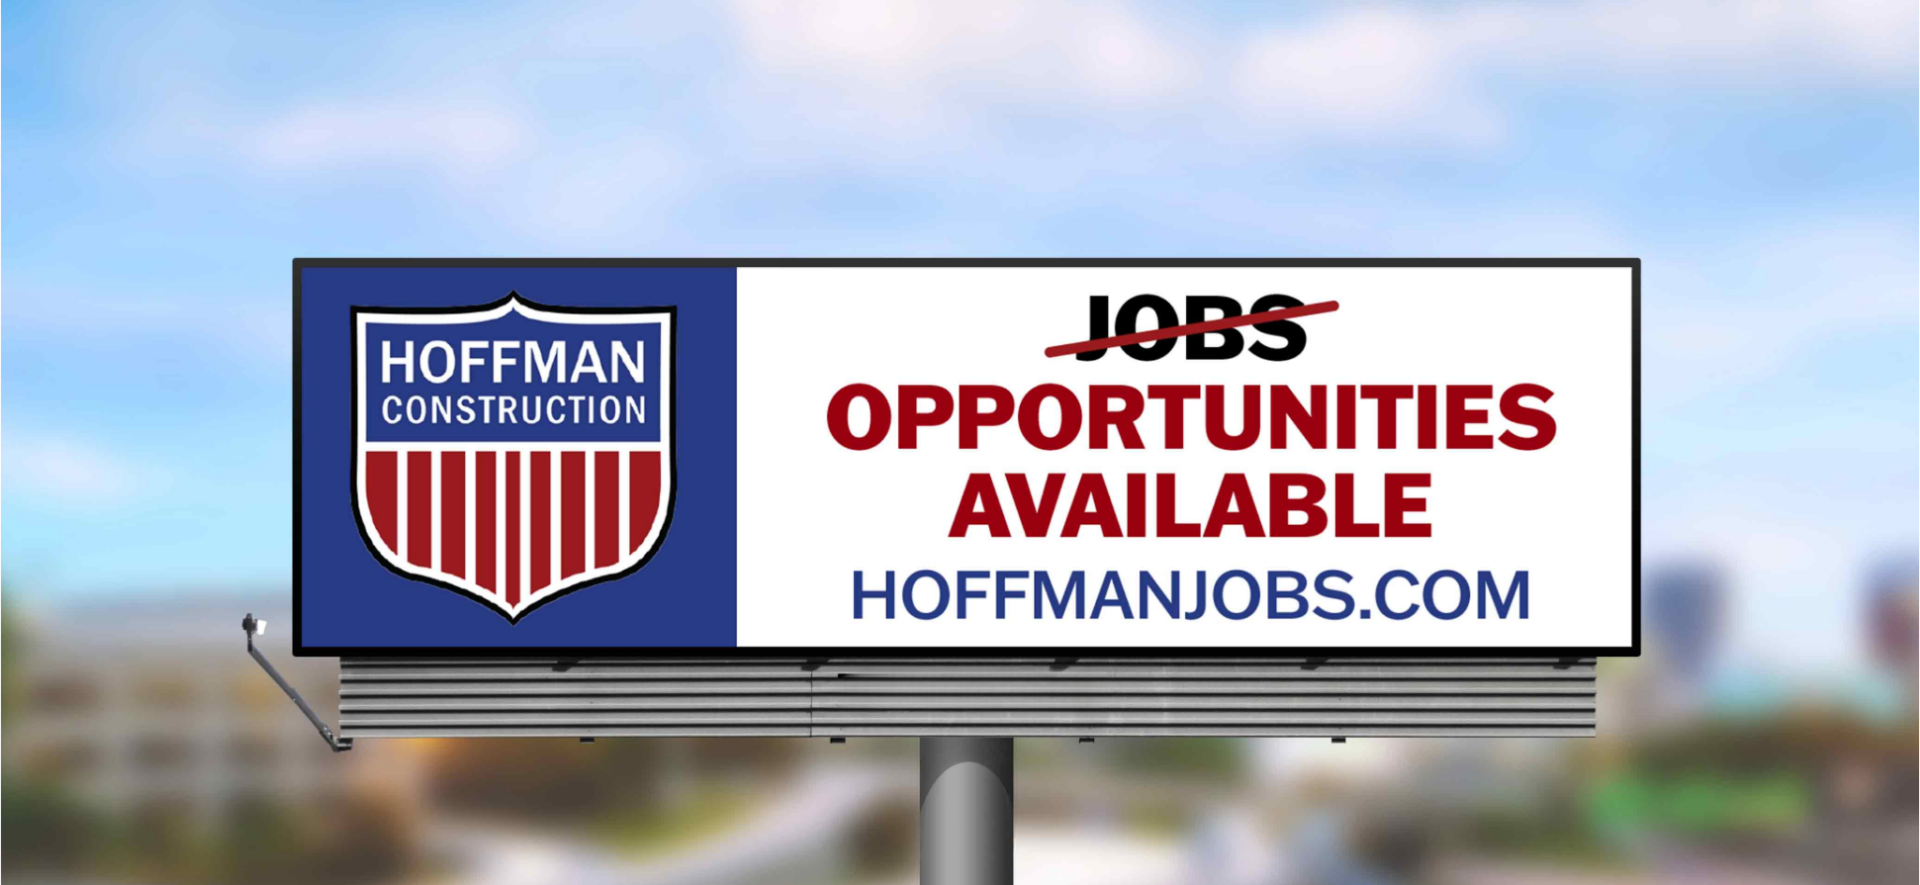 A billboard for the HoffmanJobs.com campaign for Hoffman Construction Company